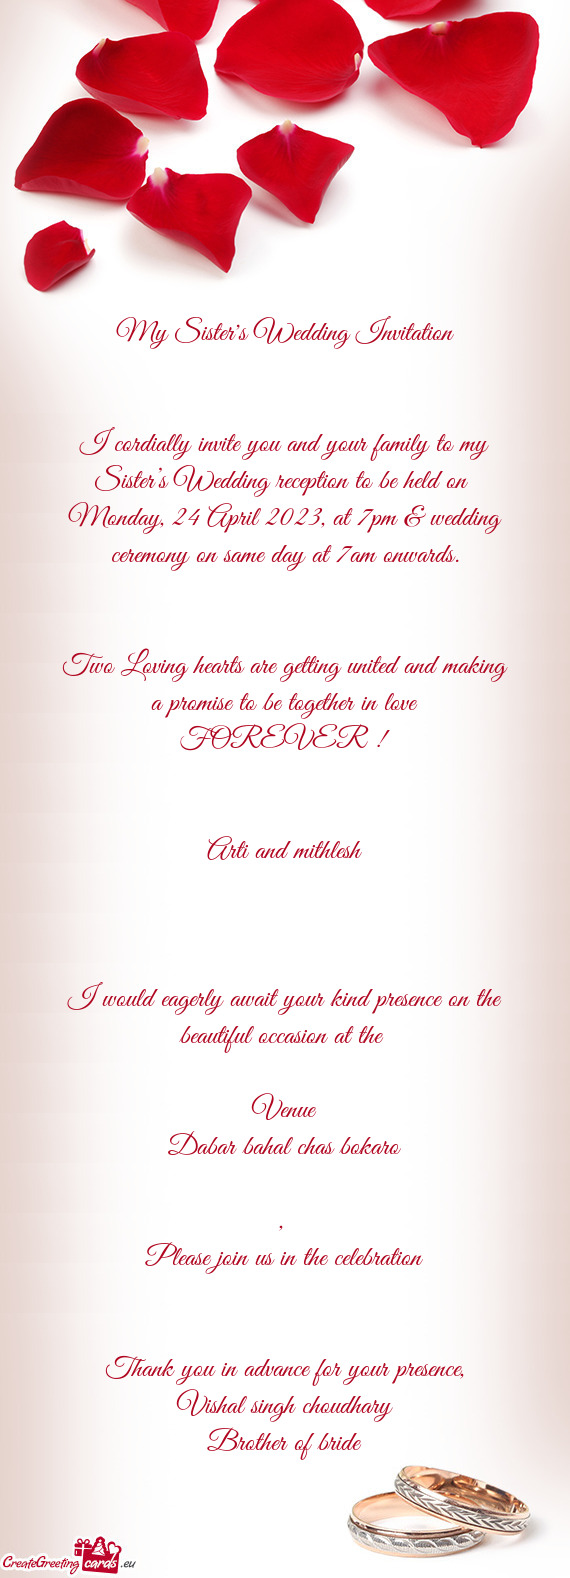 Monday, 24 April 2023, at 7pm & wedding ceremony on same day at 7am onwards